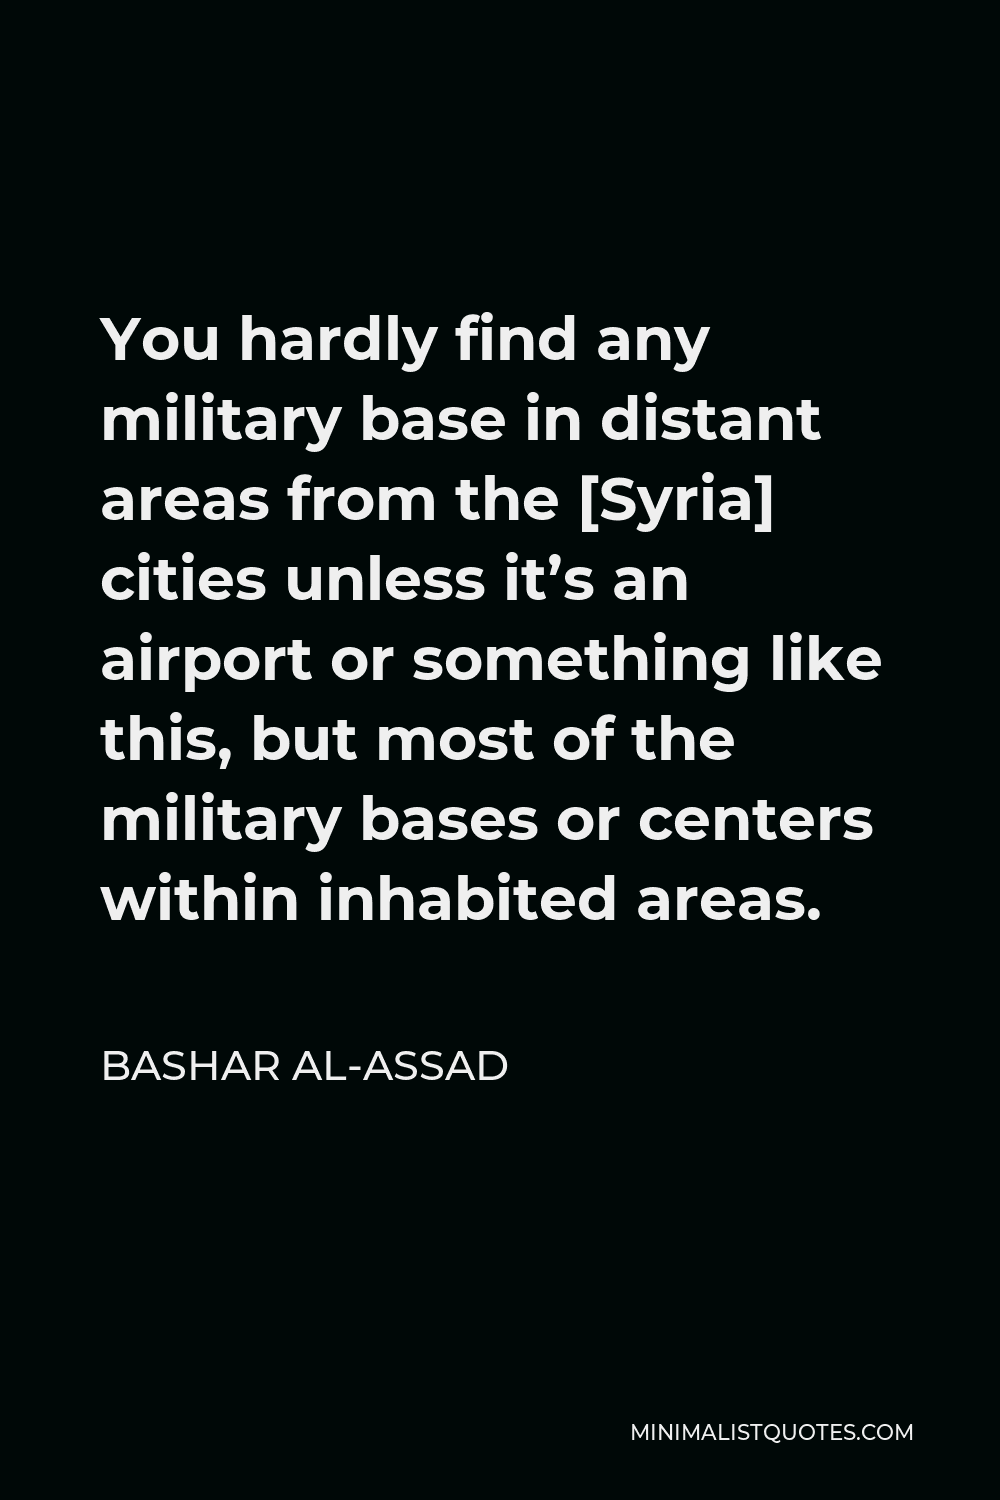 Bashar al-Assad Quote - You hardly find any military base in distant areas from the [Syria] cities unless it’s an airport or something like this, but most of the military bases or centers within inhabited areas.